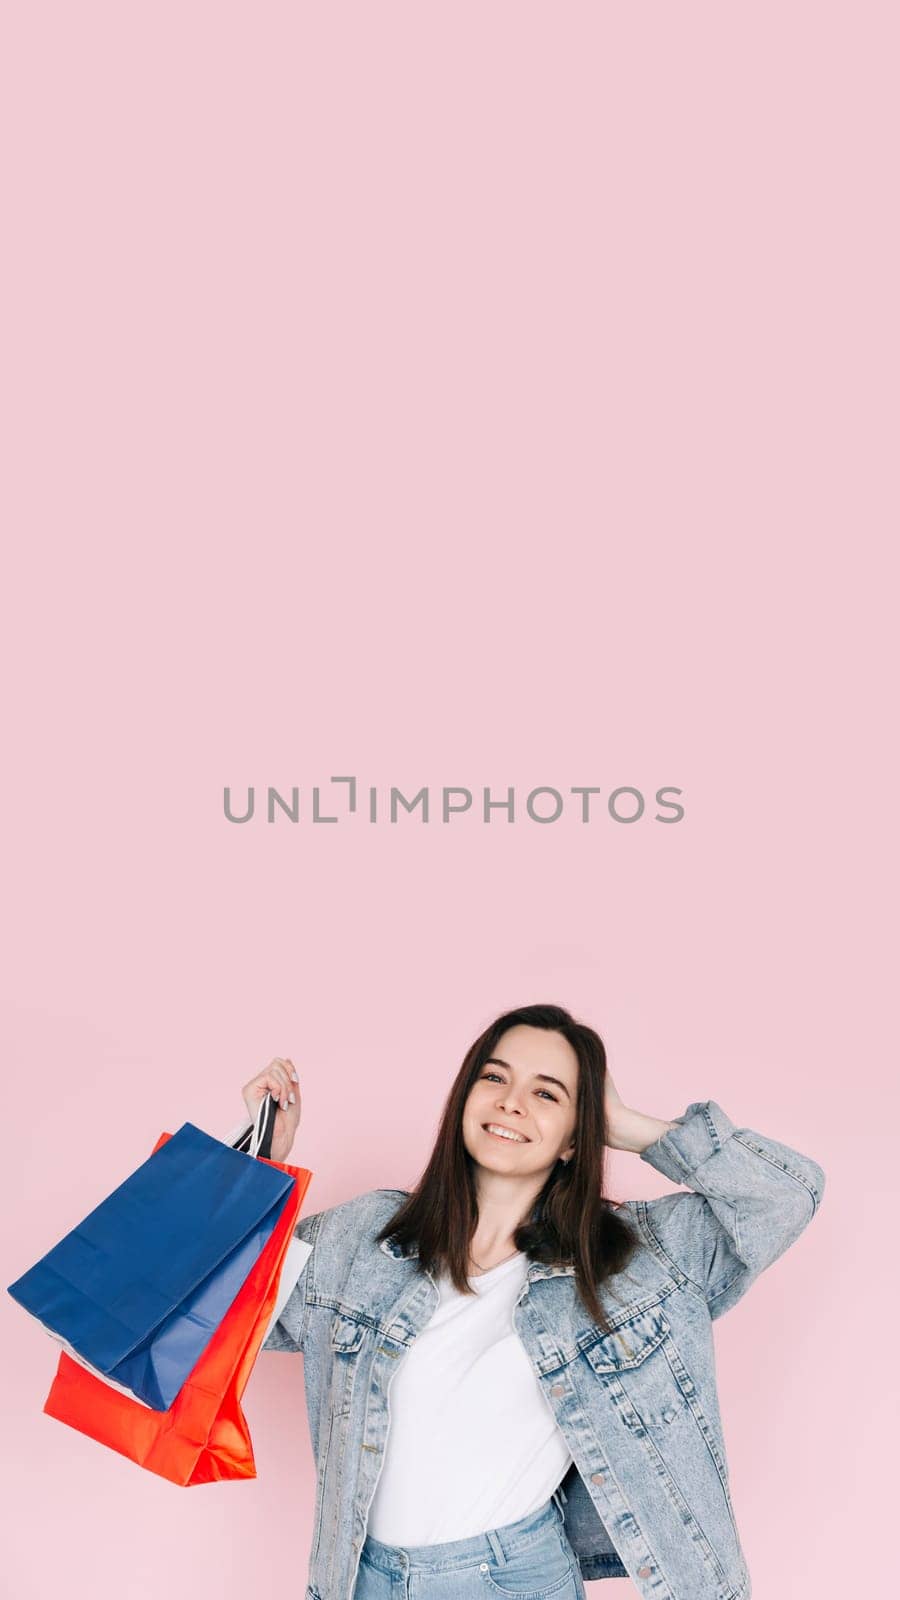 Joyful Shopper: Young Woman in Denim Shirt Celebrating, Arm Raised in Excitement, Against Pink Background, Delighted by Online Shopping or Amazing Find, Vertical photography by ViShark